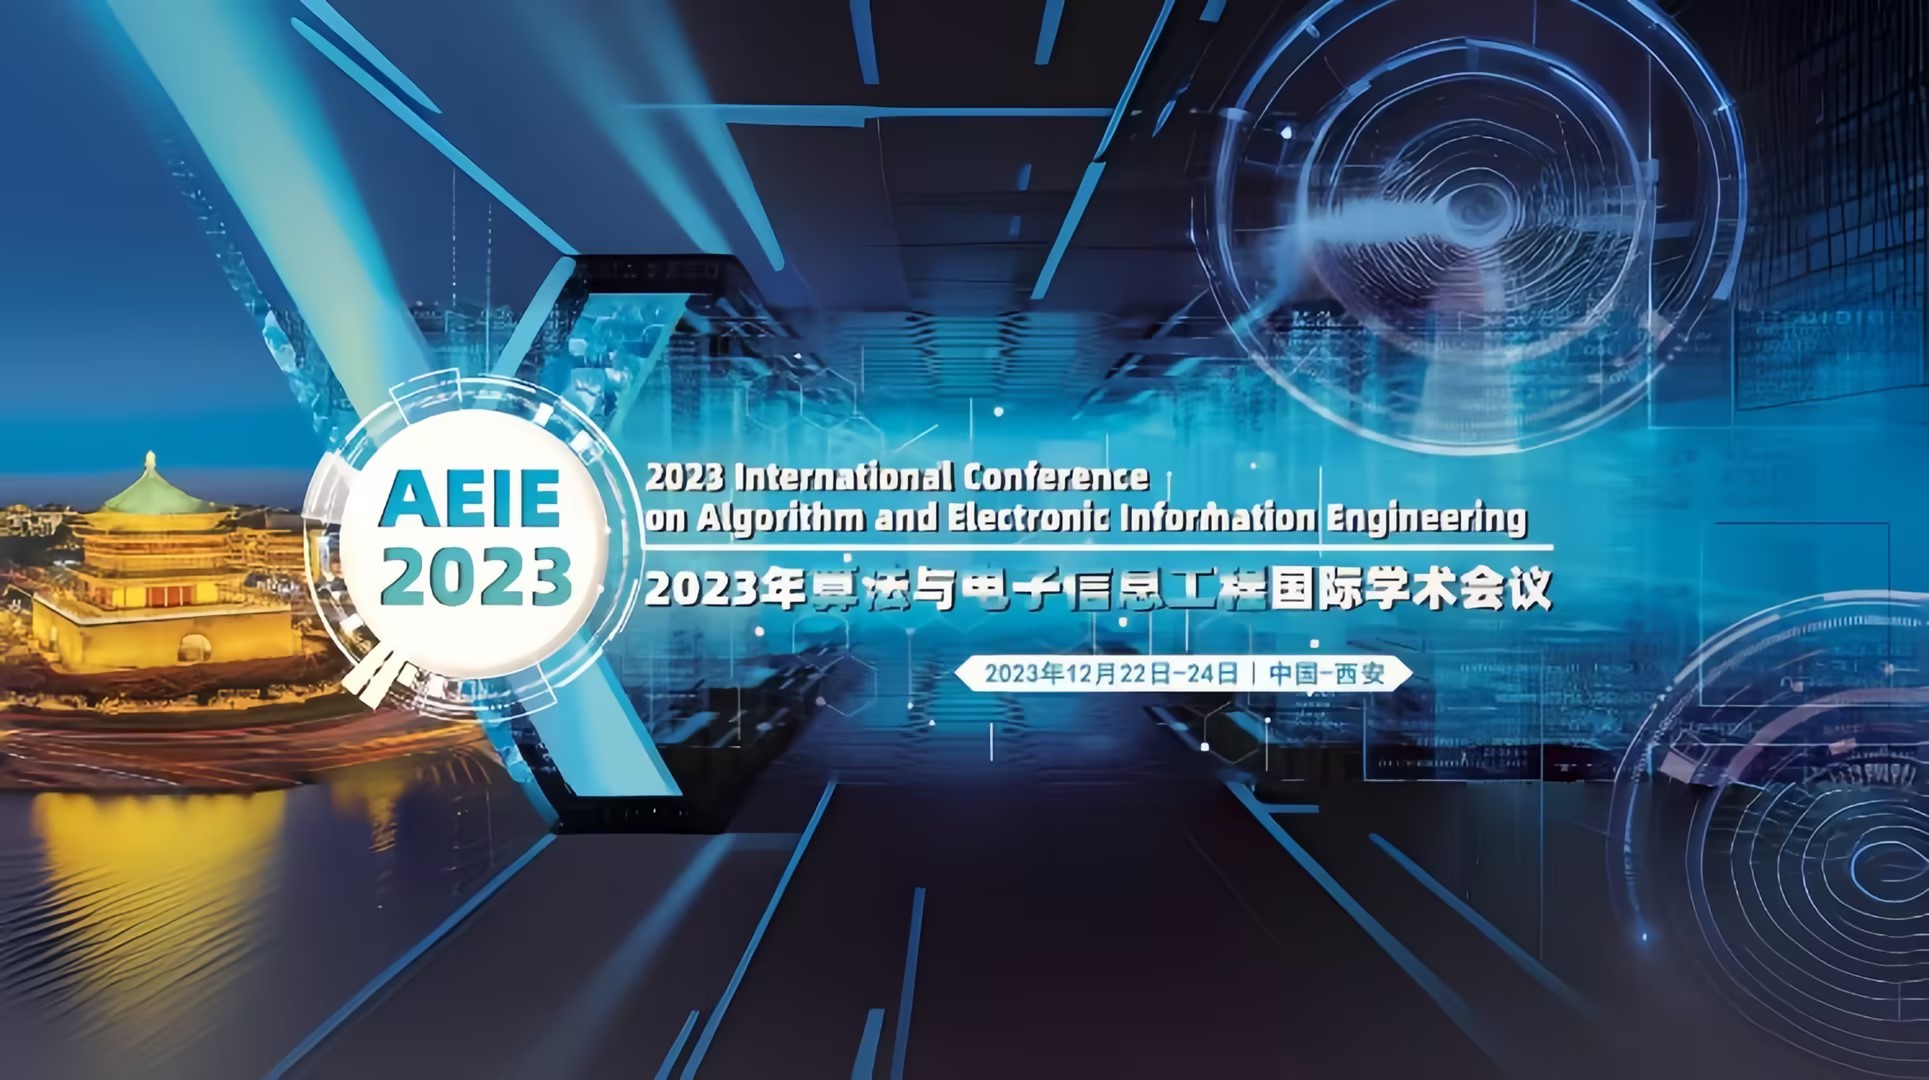 The 2023 International Conference on Algorithm and Electronic Information Engineering (AEIE 2023)